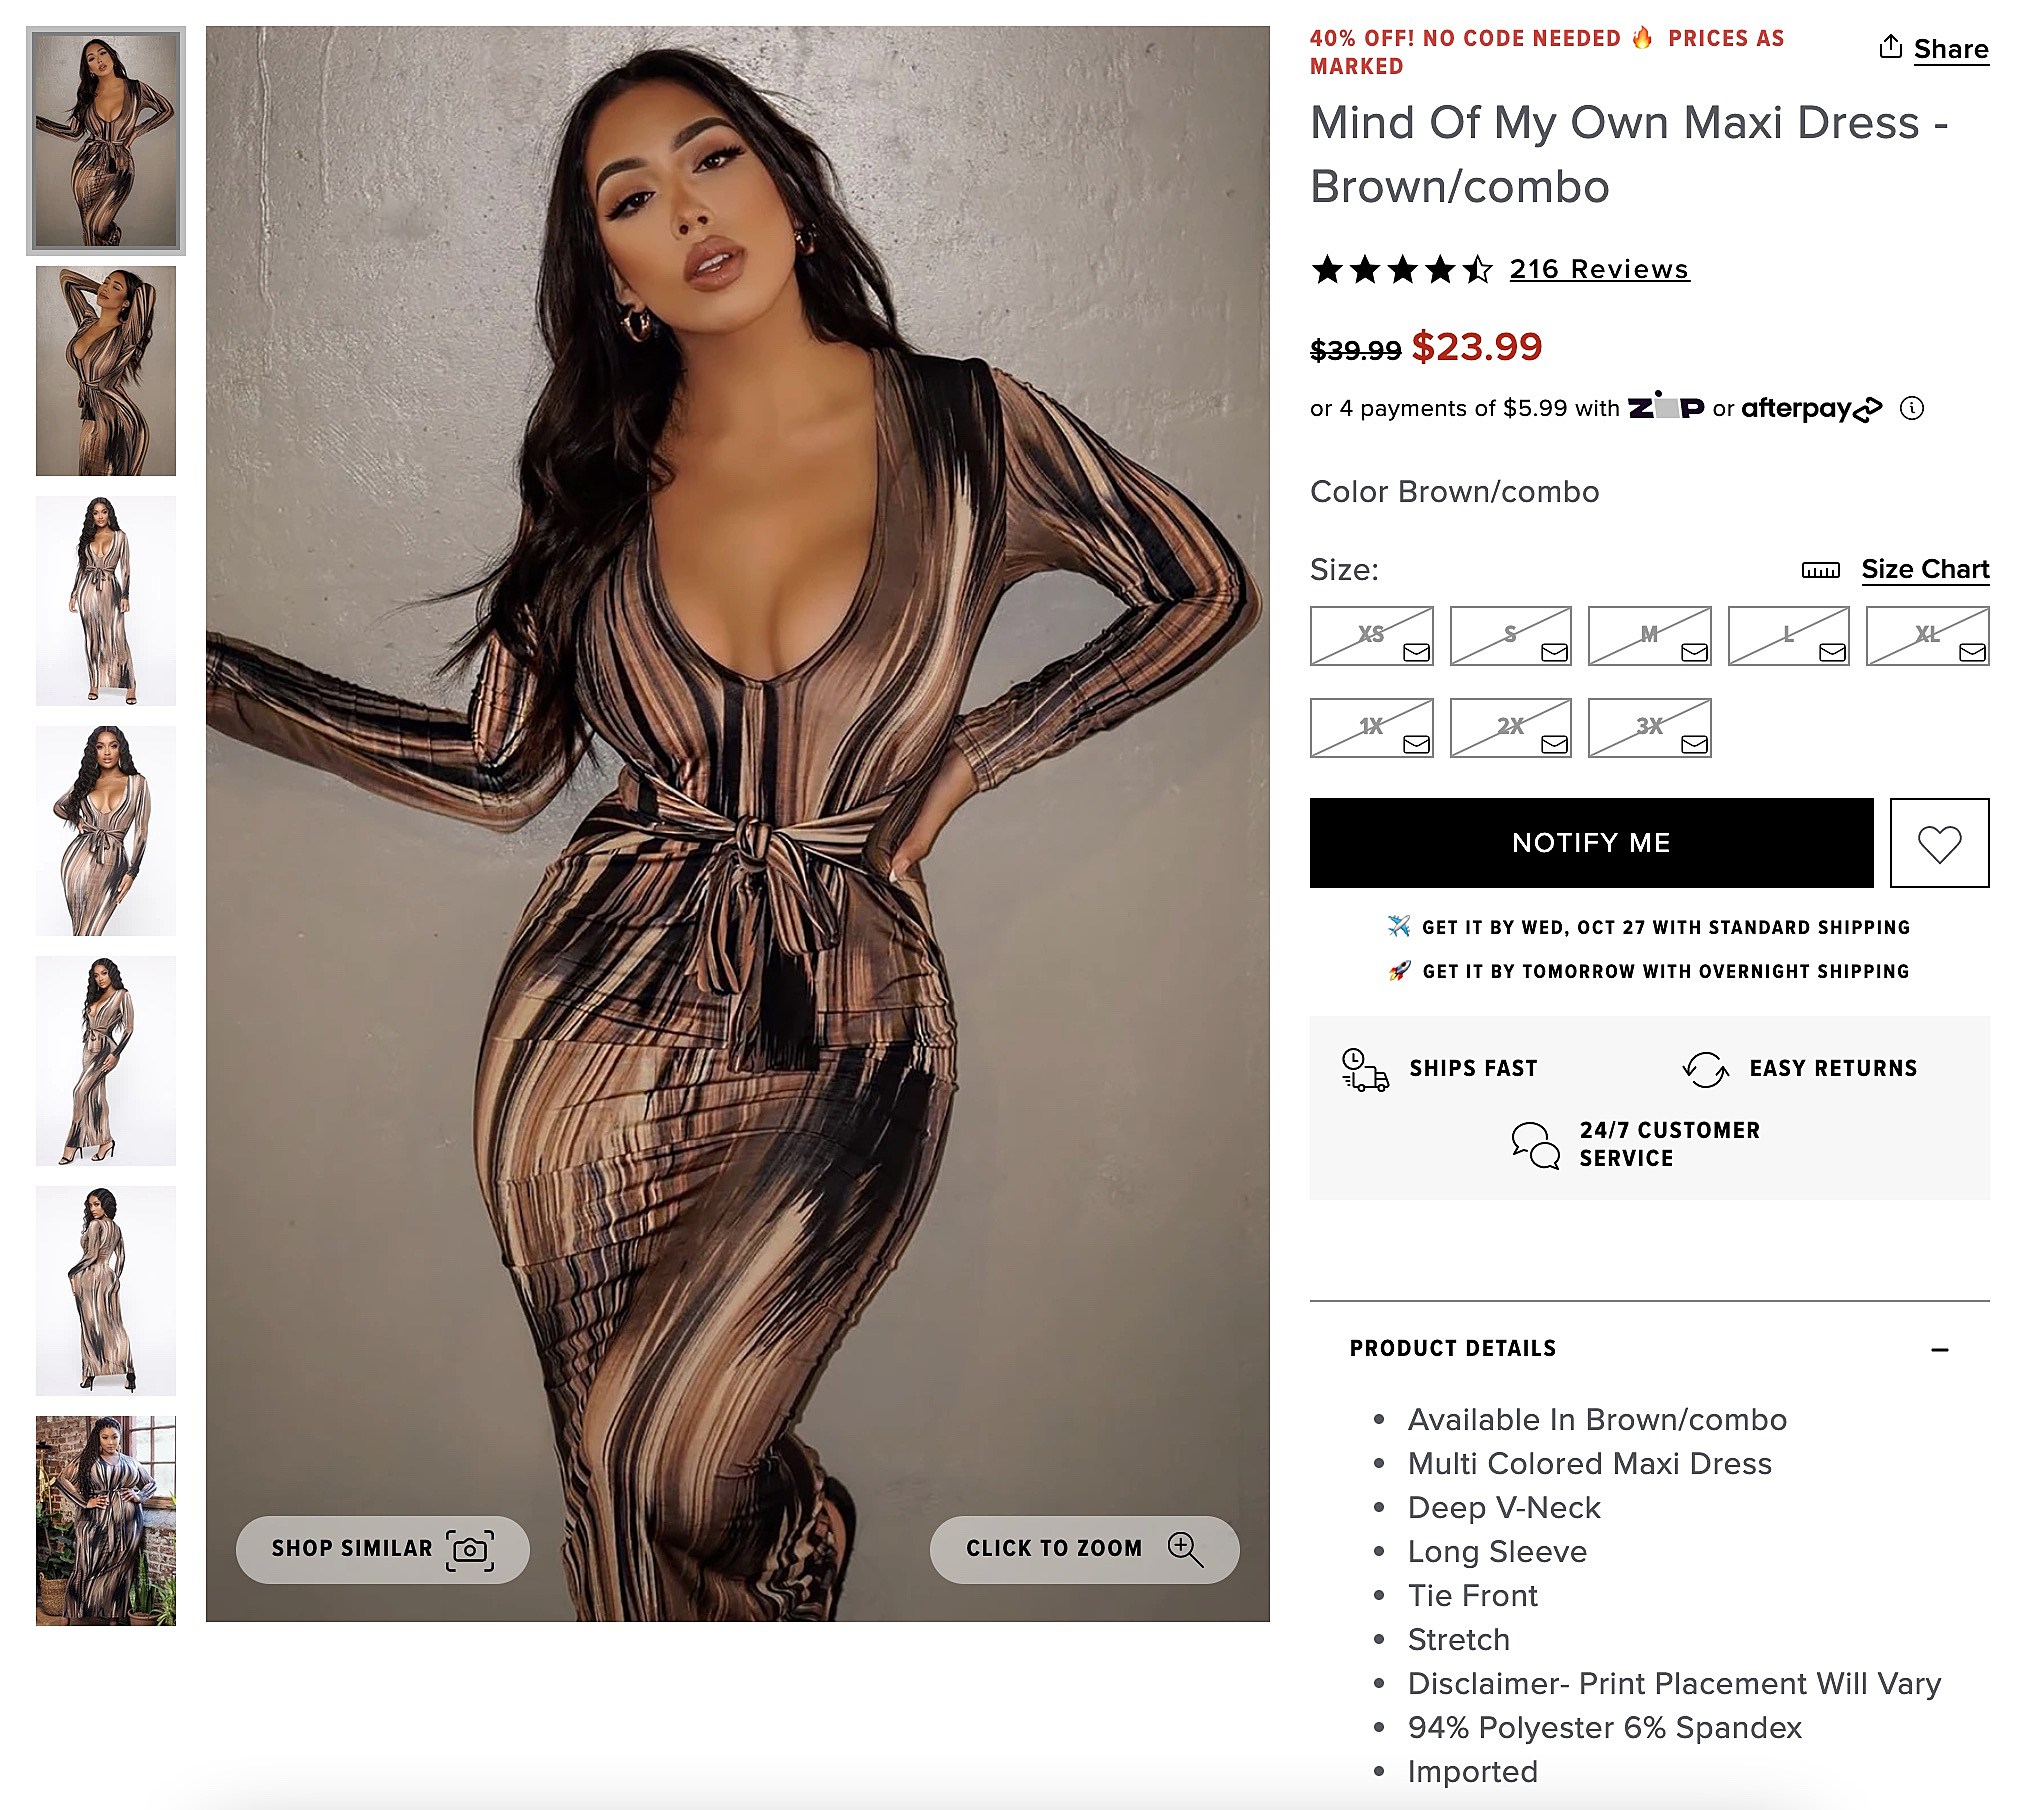 Illusion Dress' Goes Viral on TikTok for Taking Inches Off Waist